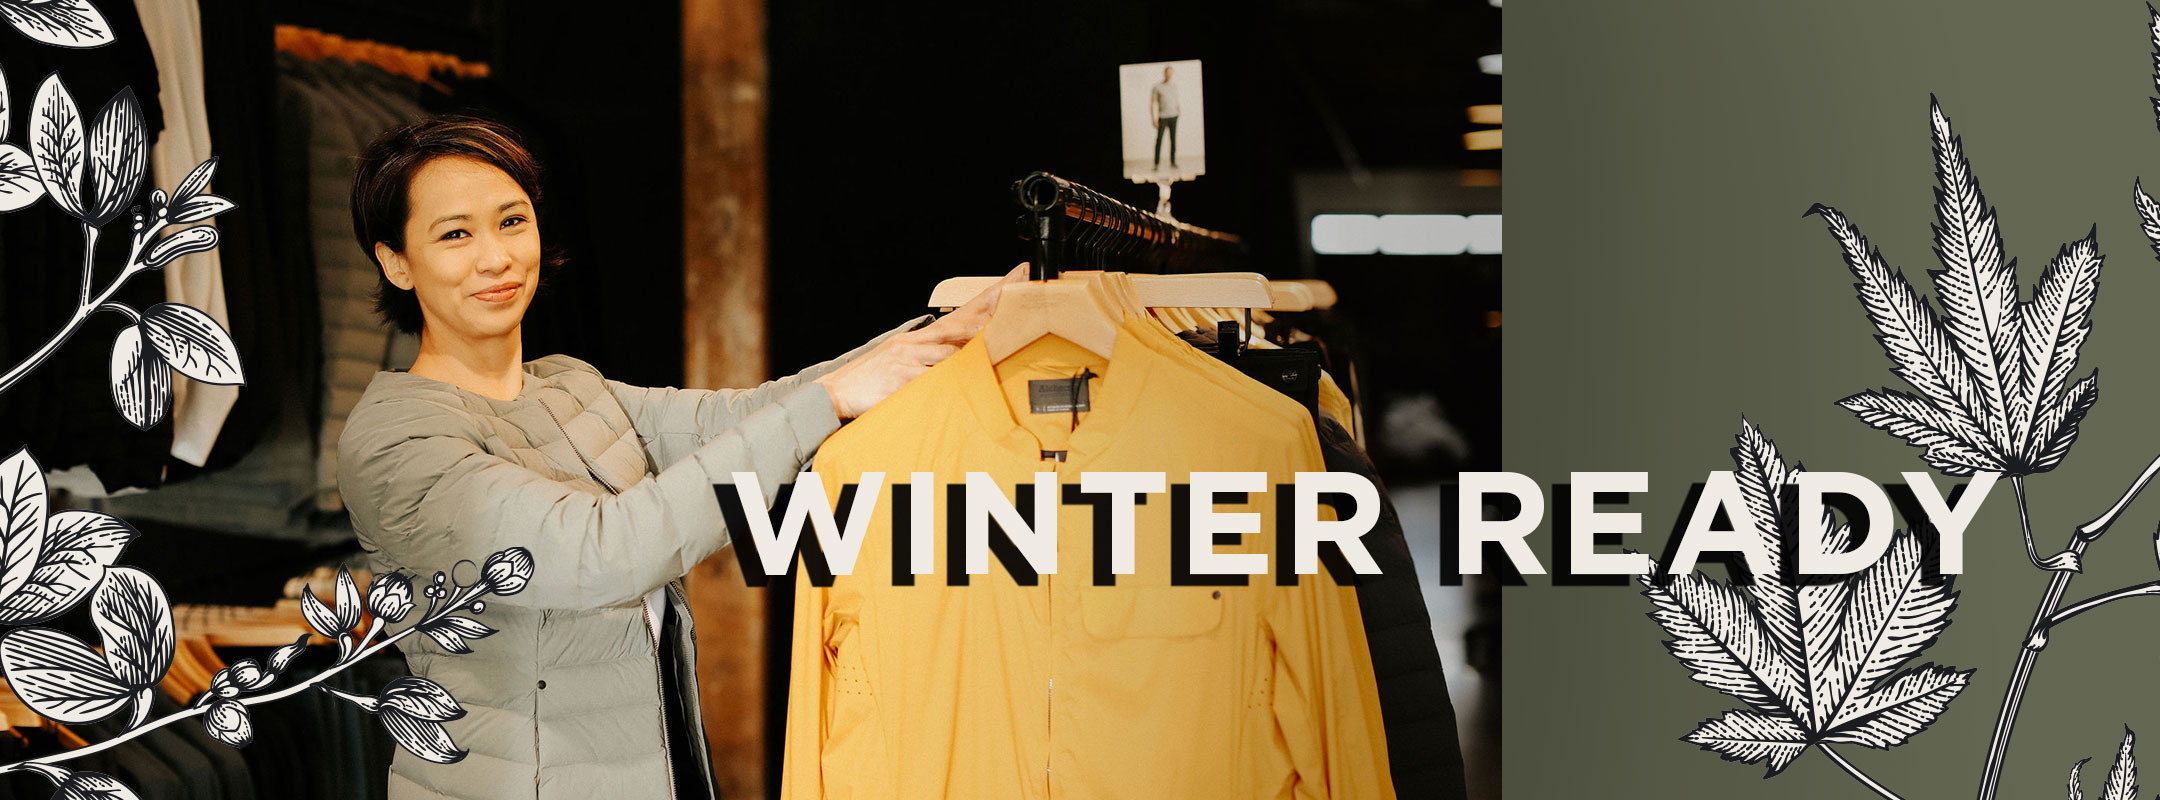 Winter fashion at The Tannery - Christchurch boutique shopping